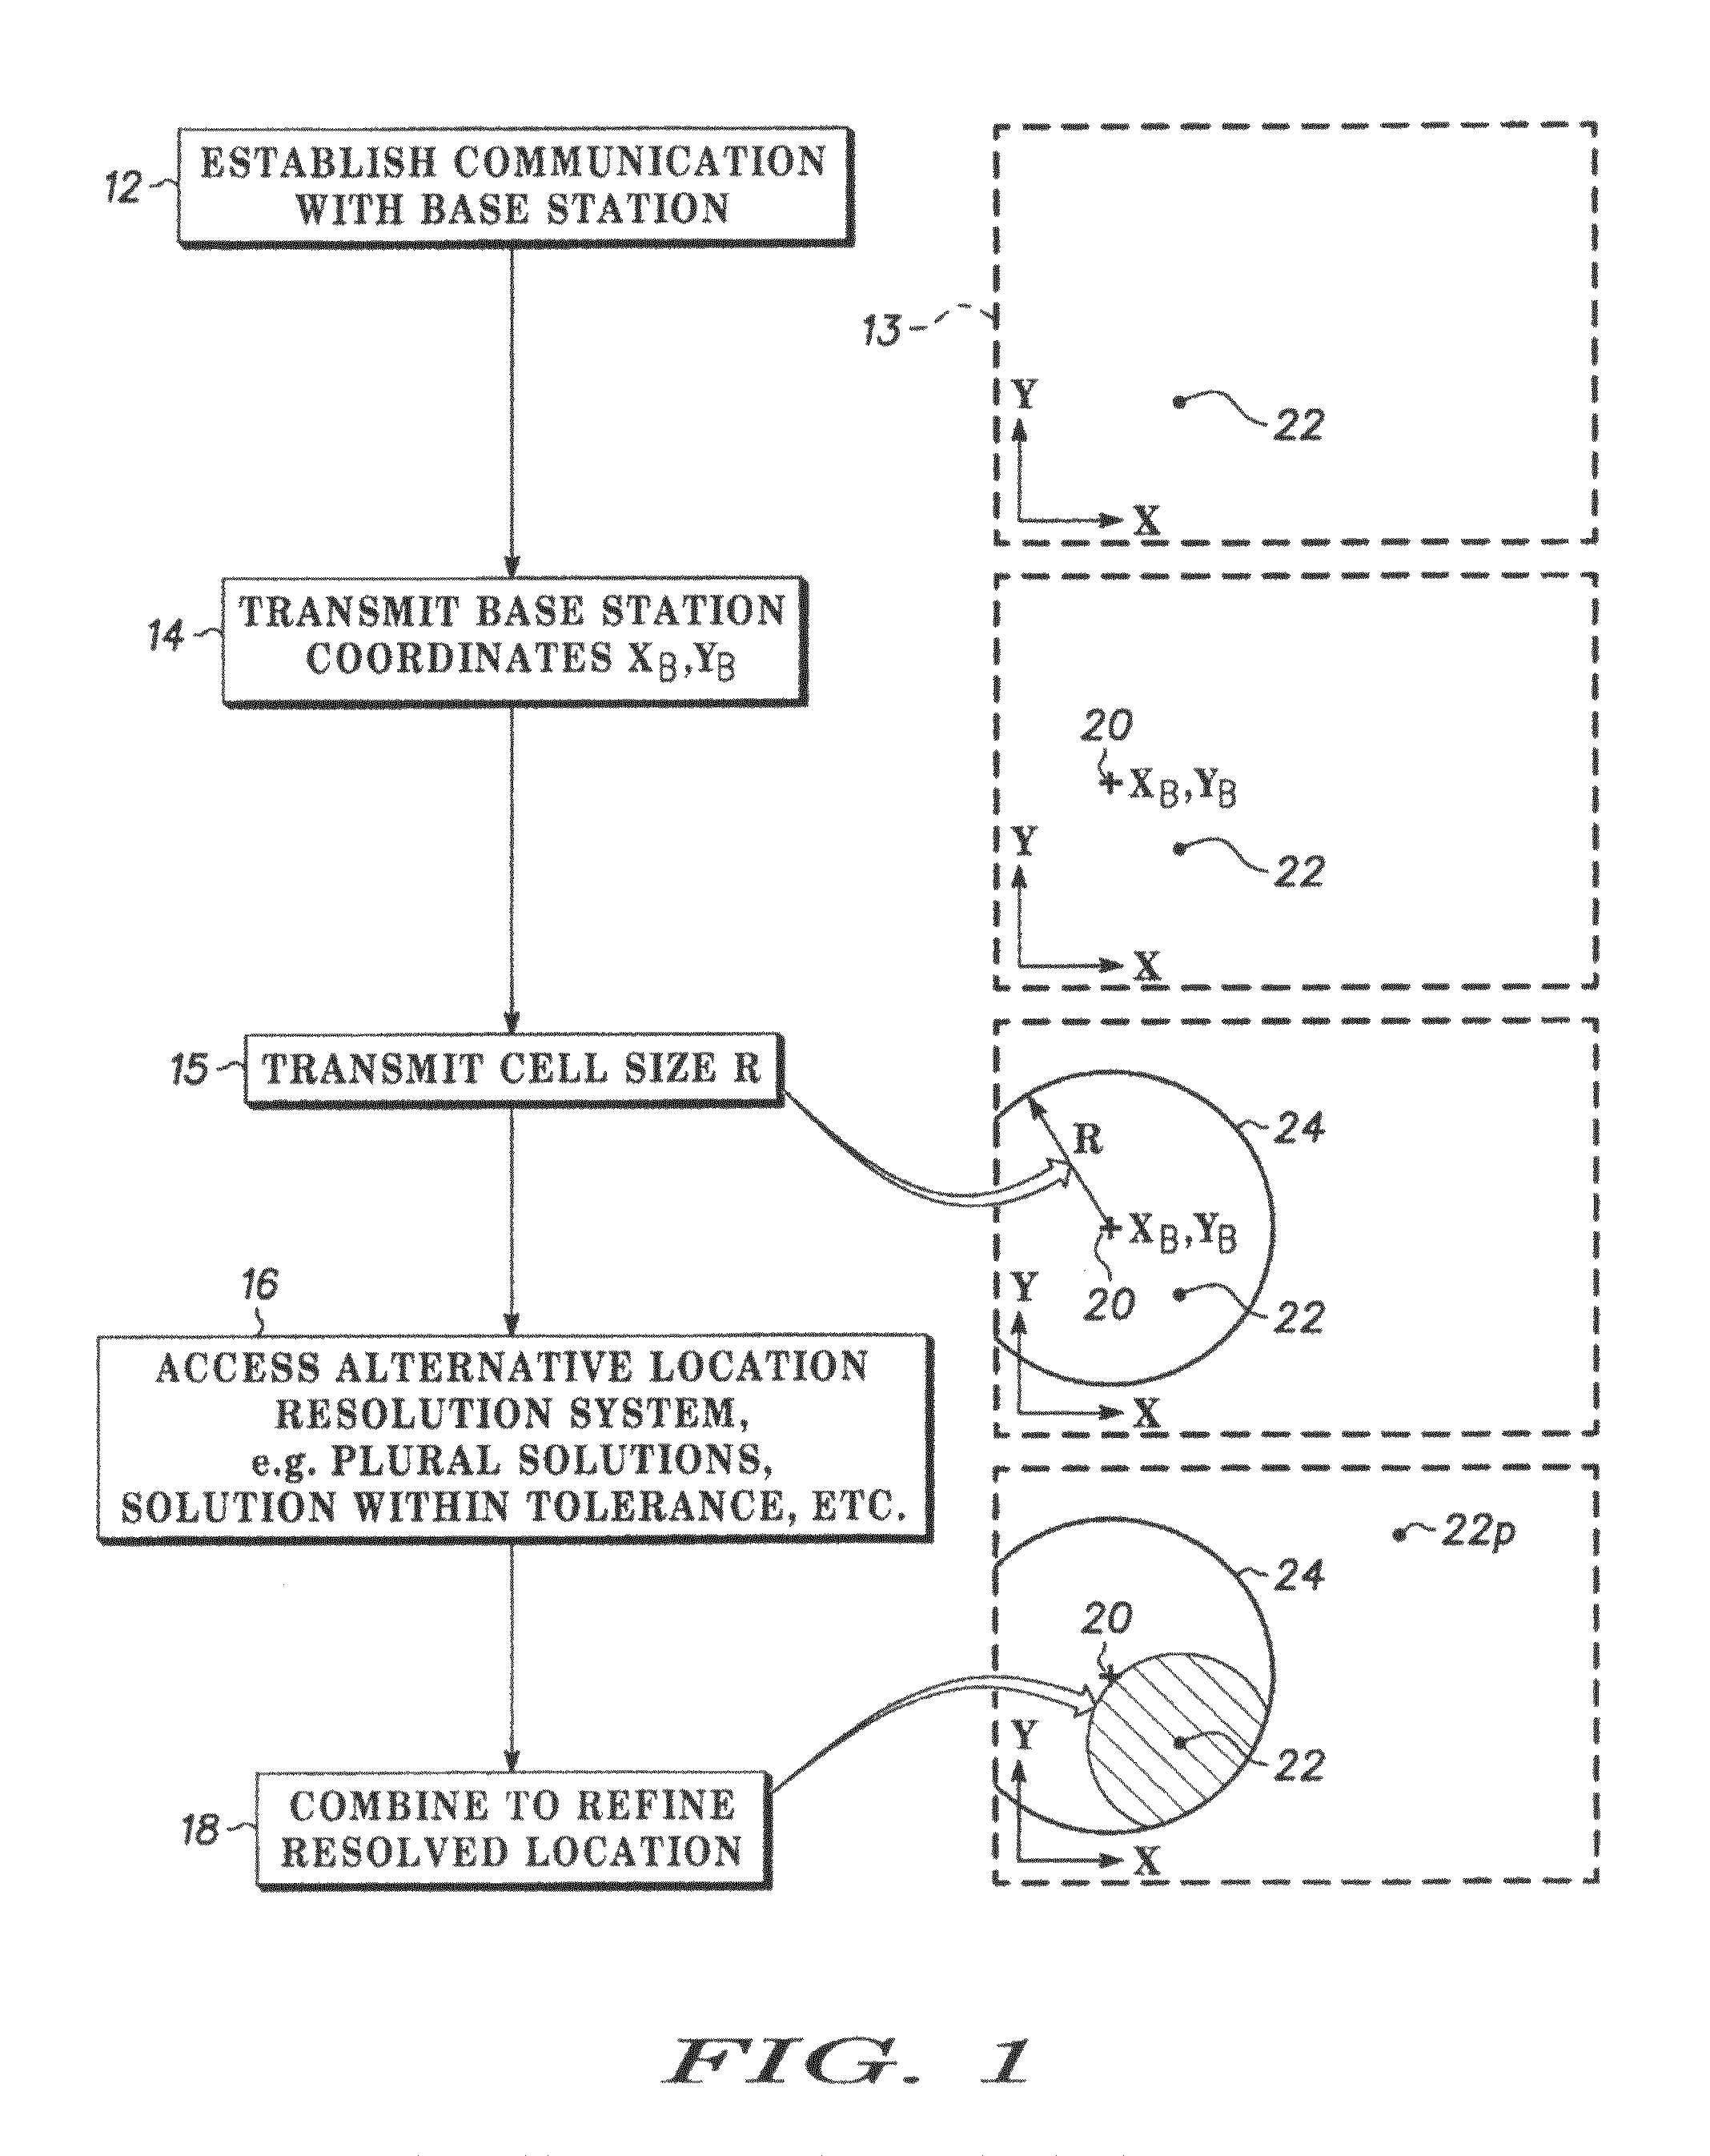 Method of enabling low tier location applications